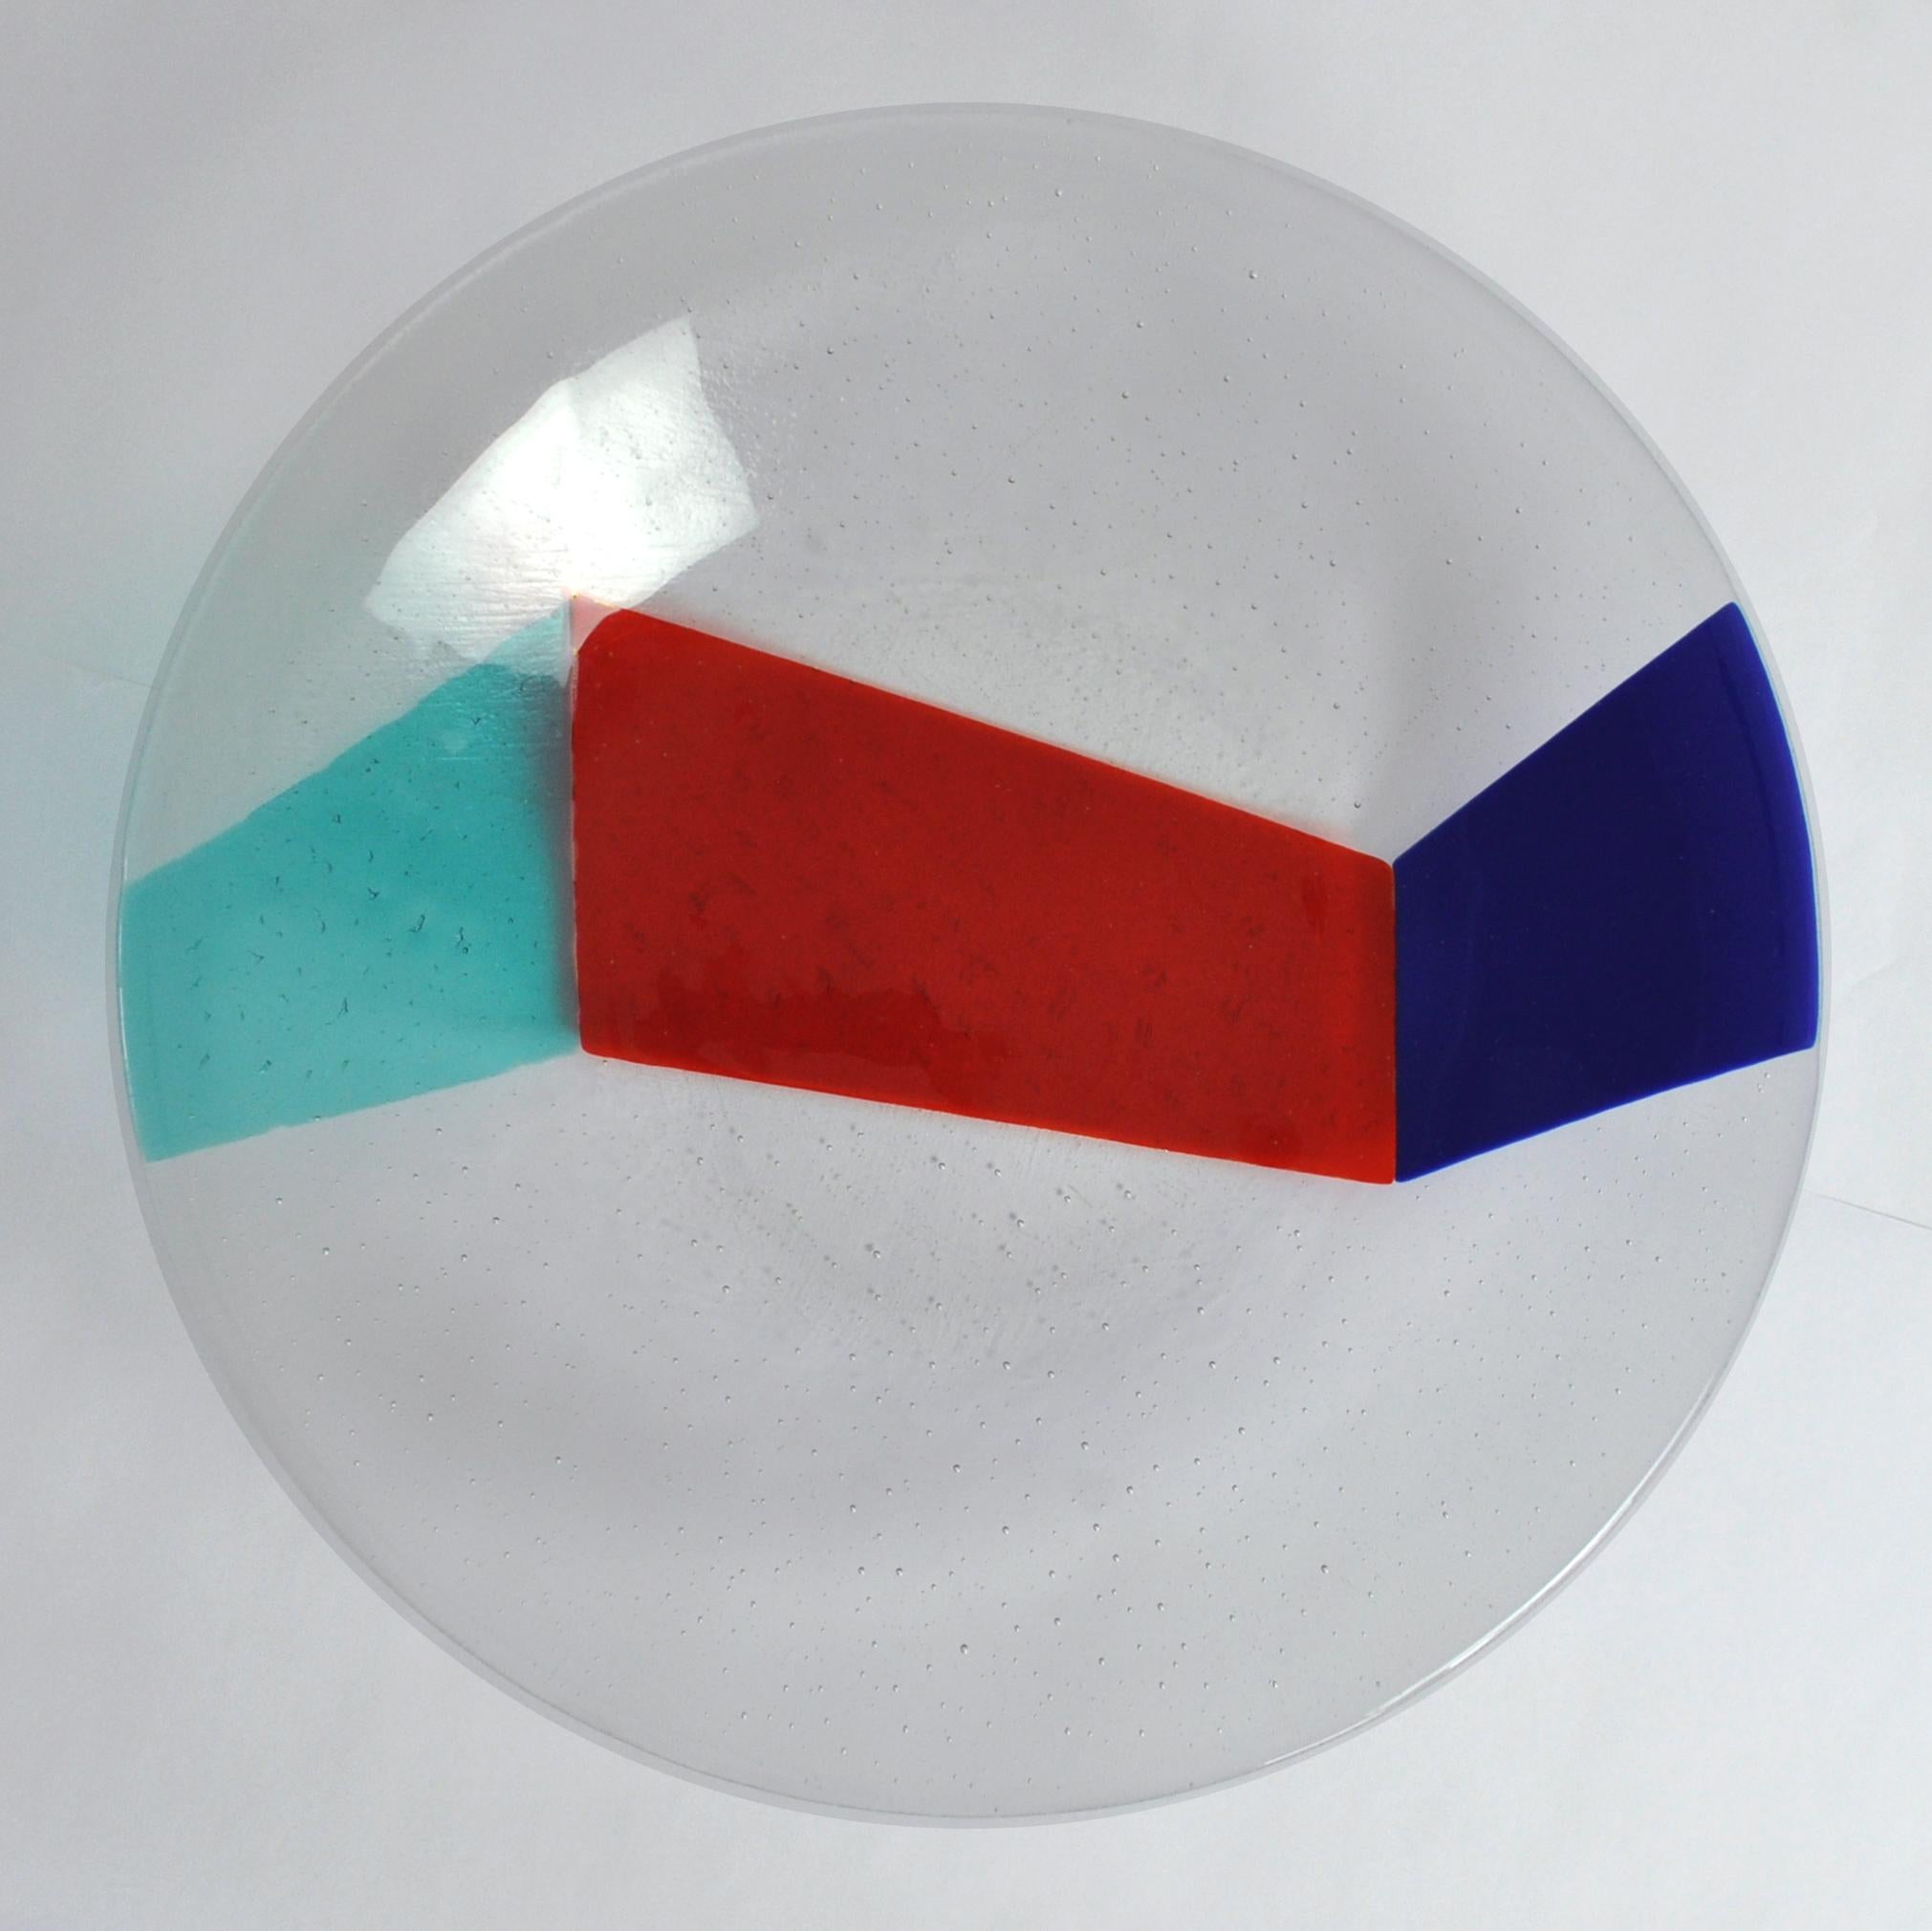 Stained glass plate or dish by the Danish artist Peter Stuhr.
Combatible glass, handmade, circa 2015.
Dimensions: Height 6 cm x diameter 38 cm

Peter Stuhr's paintings consist of an expressive picture universe made up of streams of sieving color